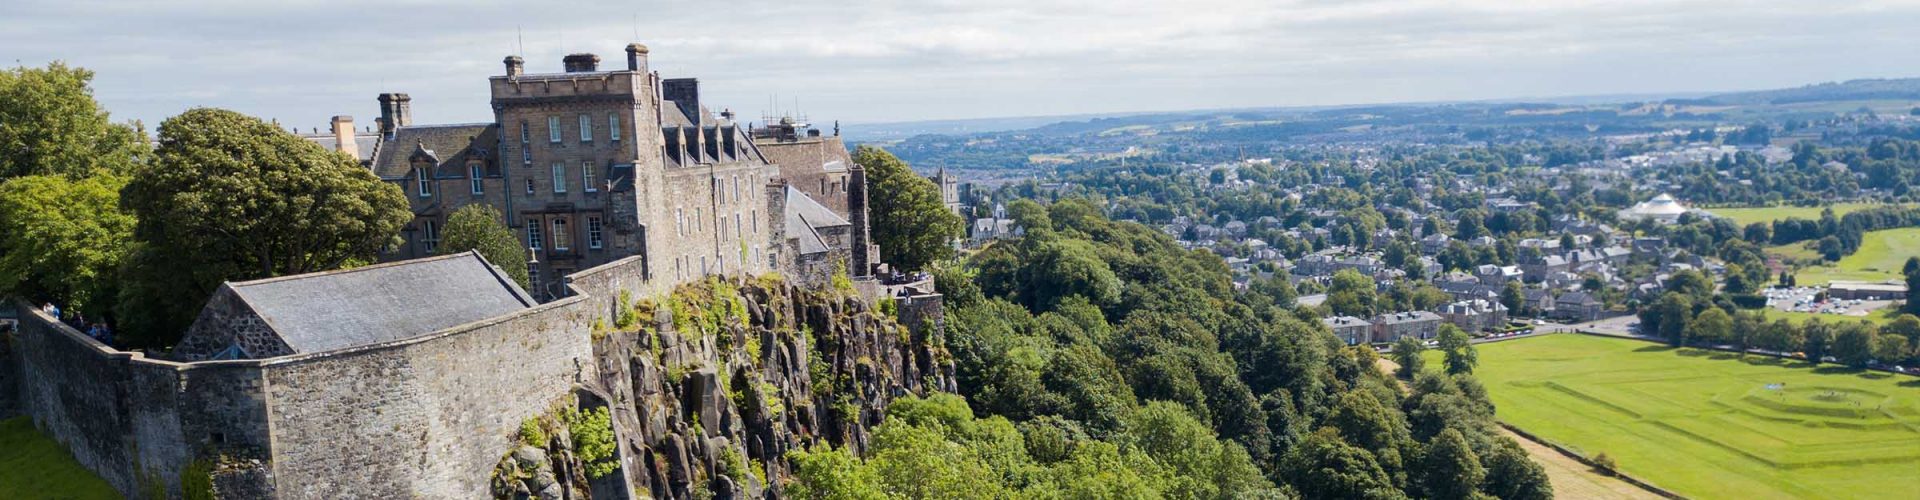 An arial shot of Stirling Castle on the rock overlooking Stirling